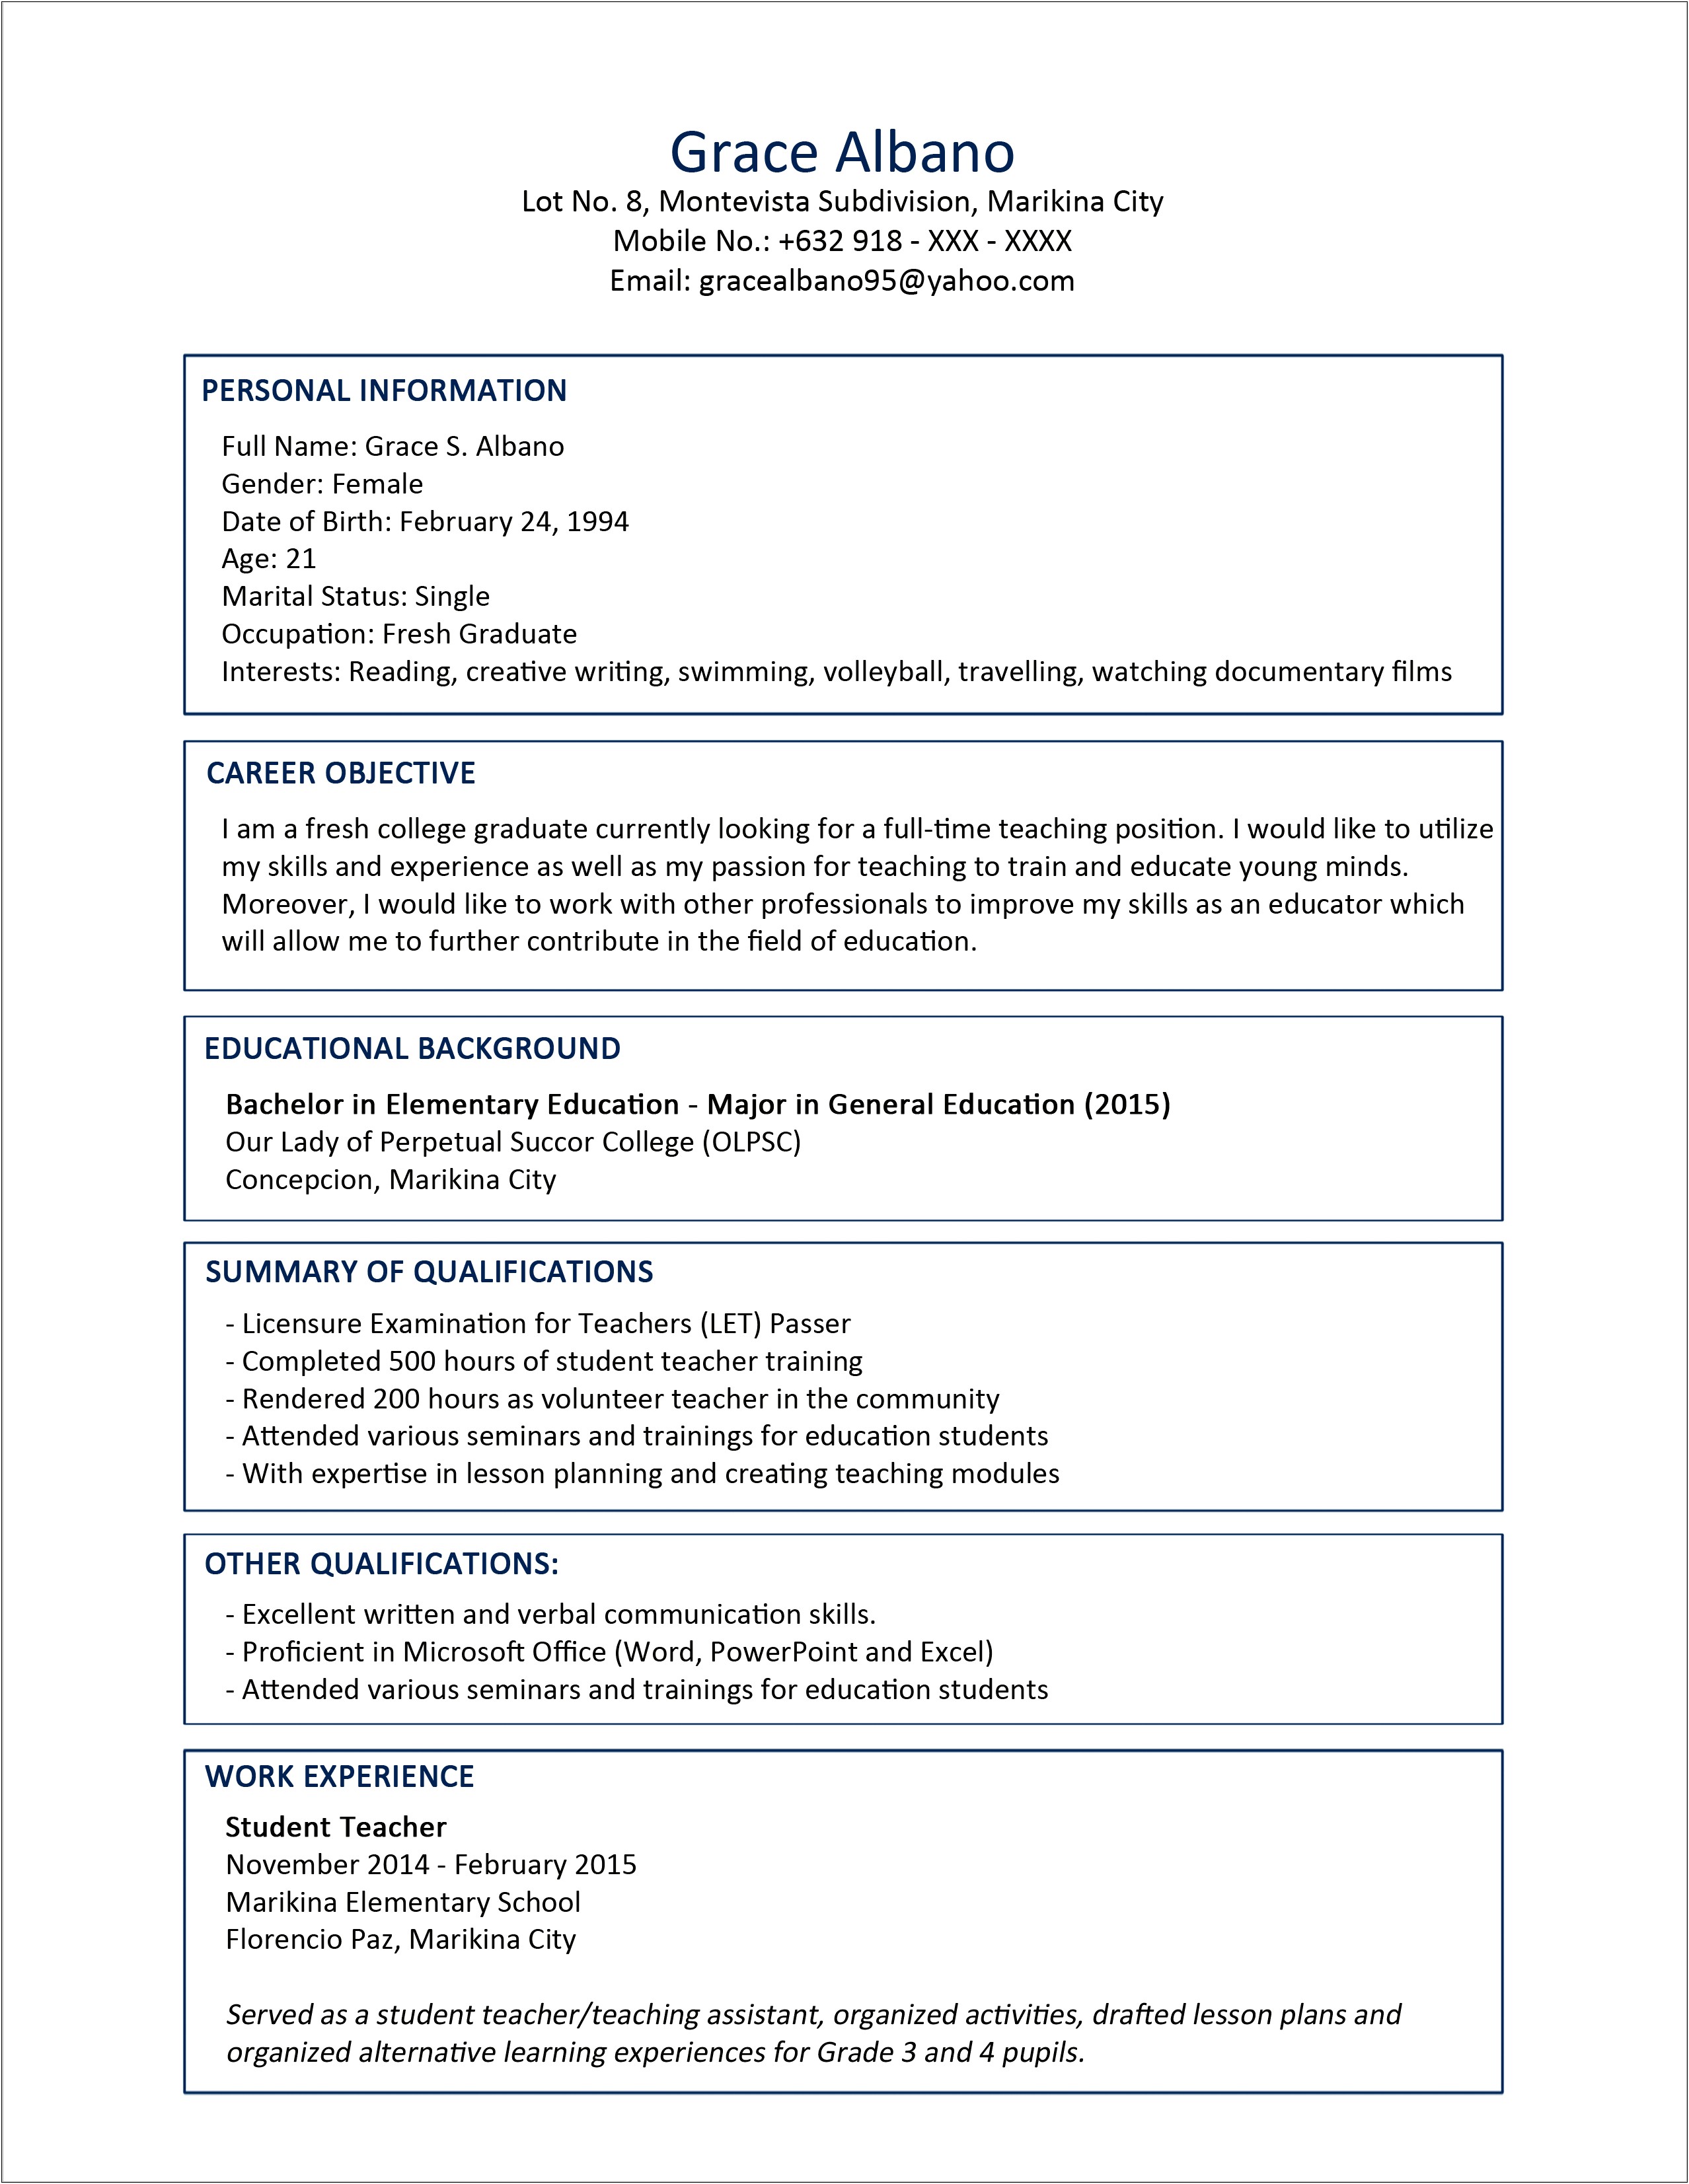 Resume Qualifications Communication Major Examples